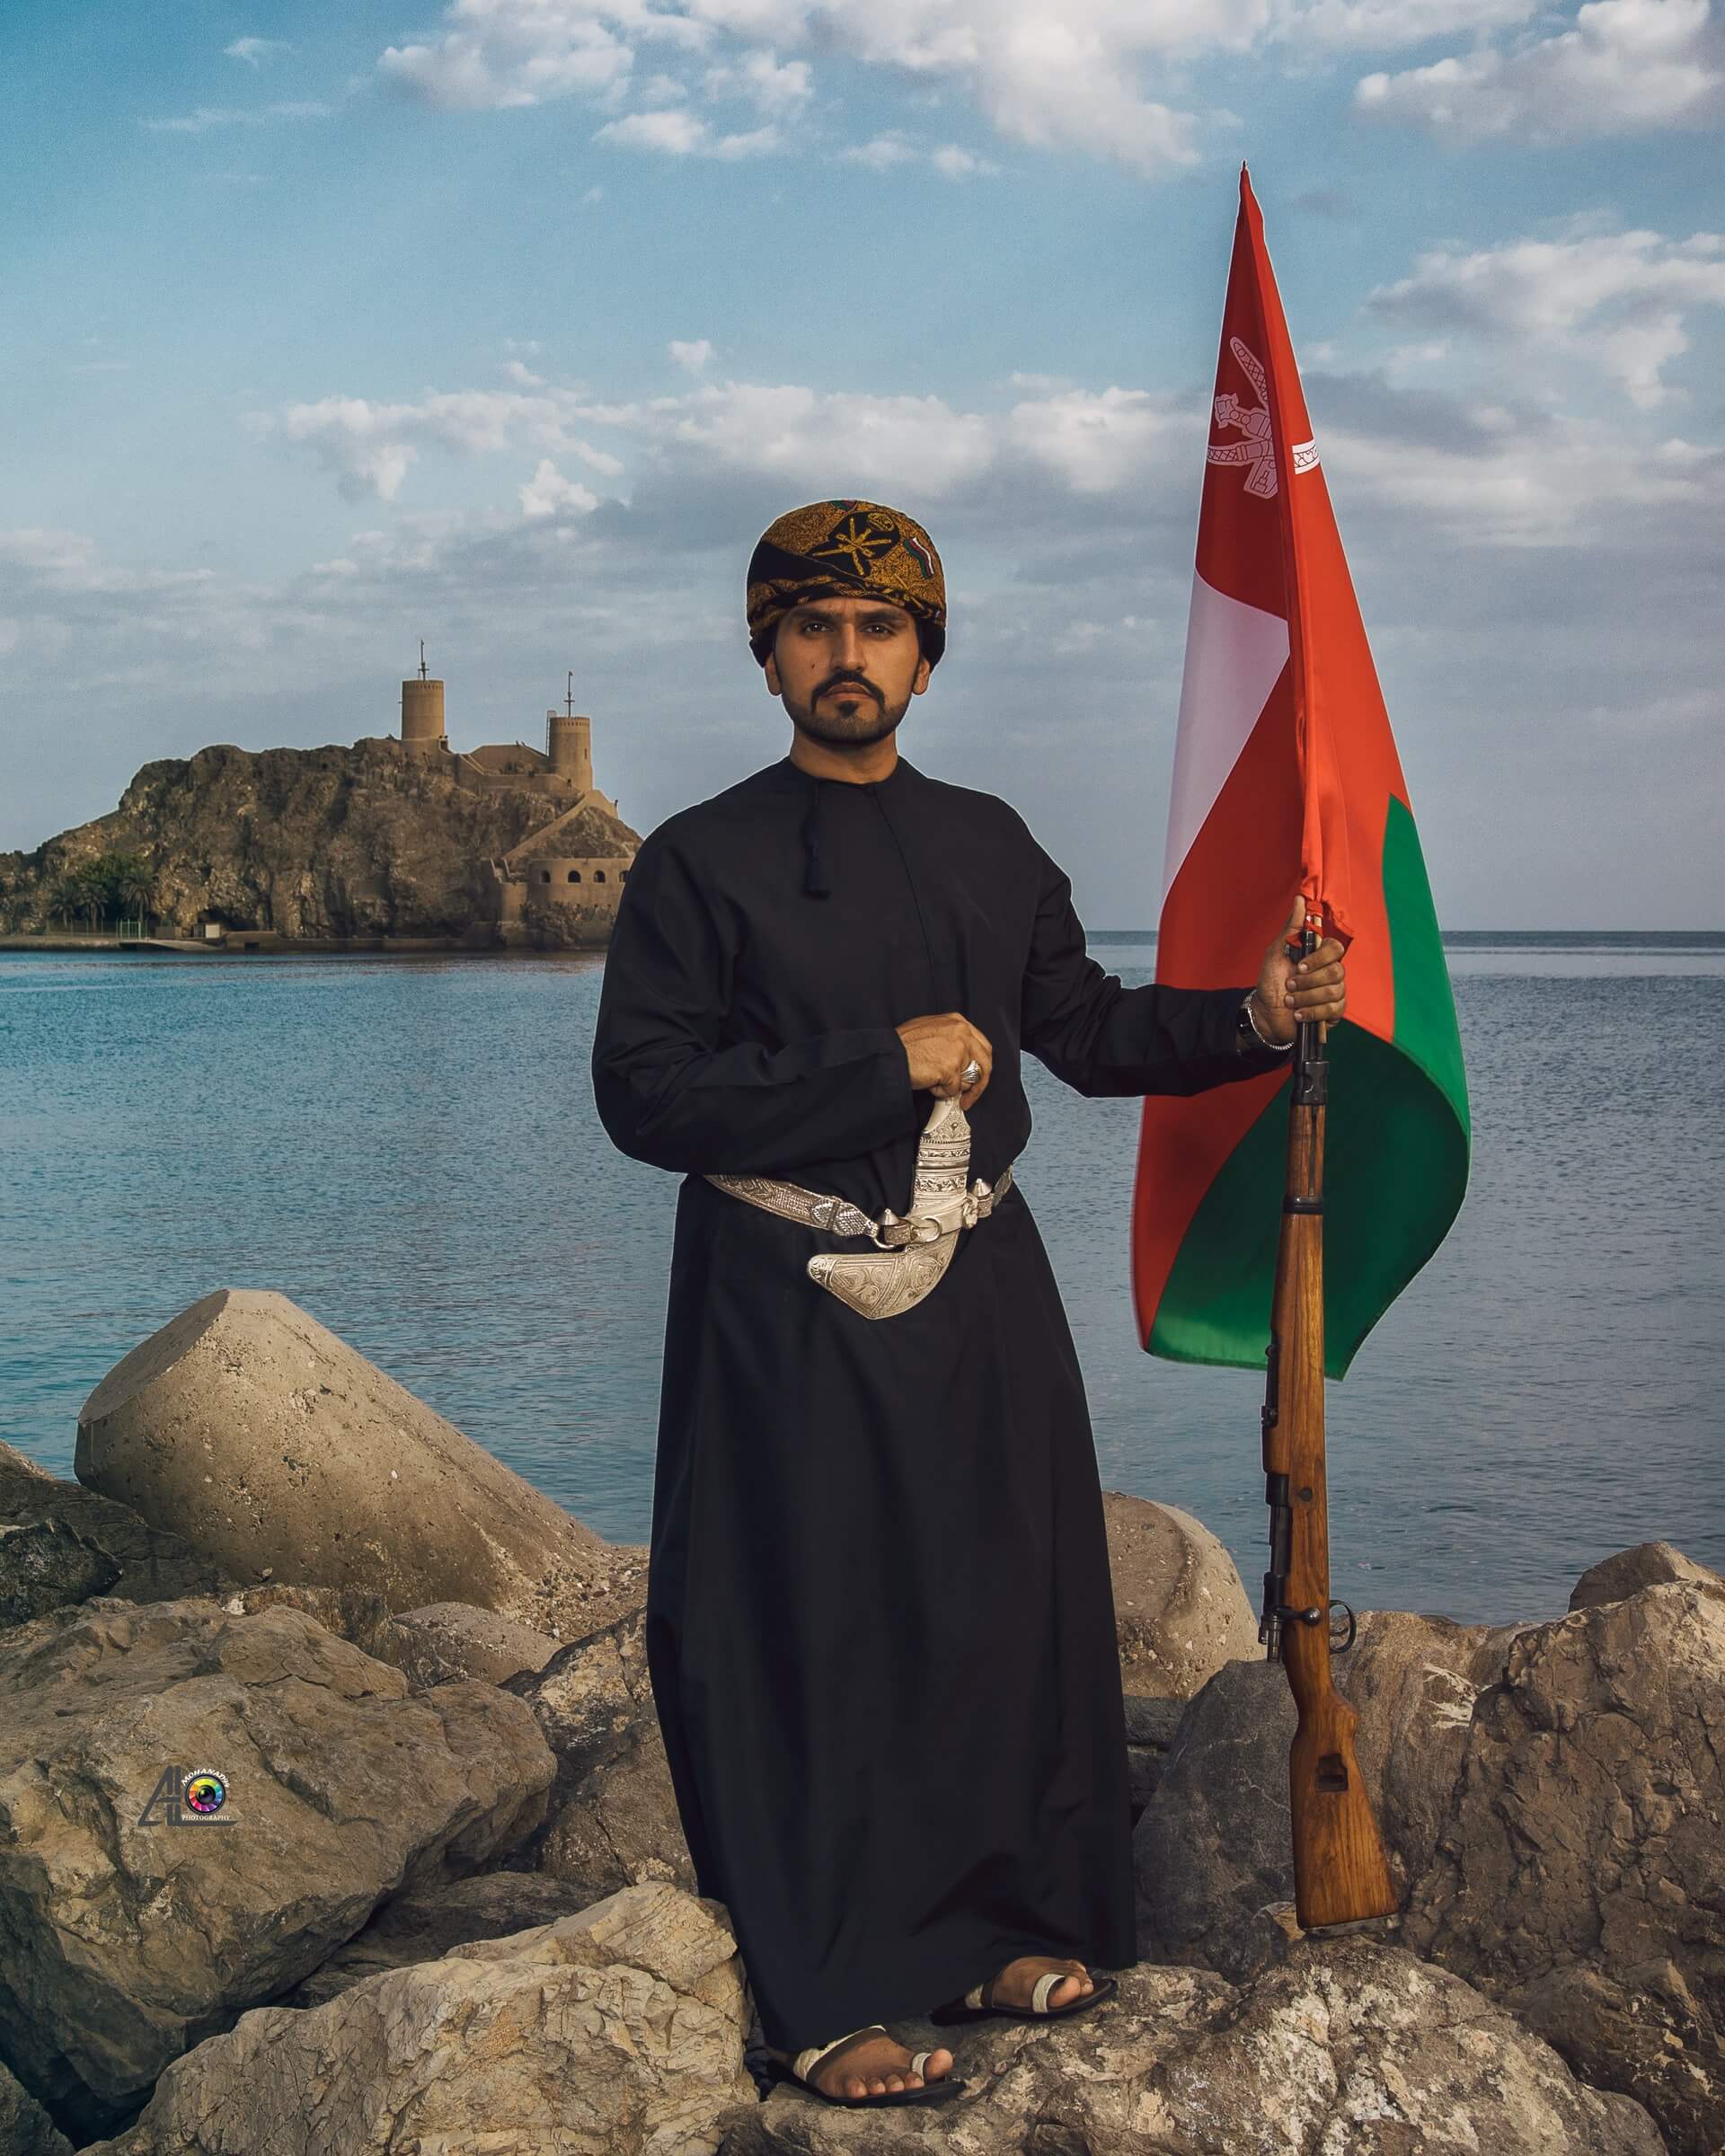 A proud Omani man in traditional dress